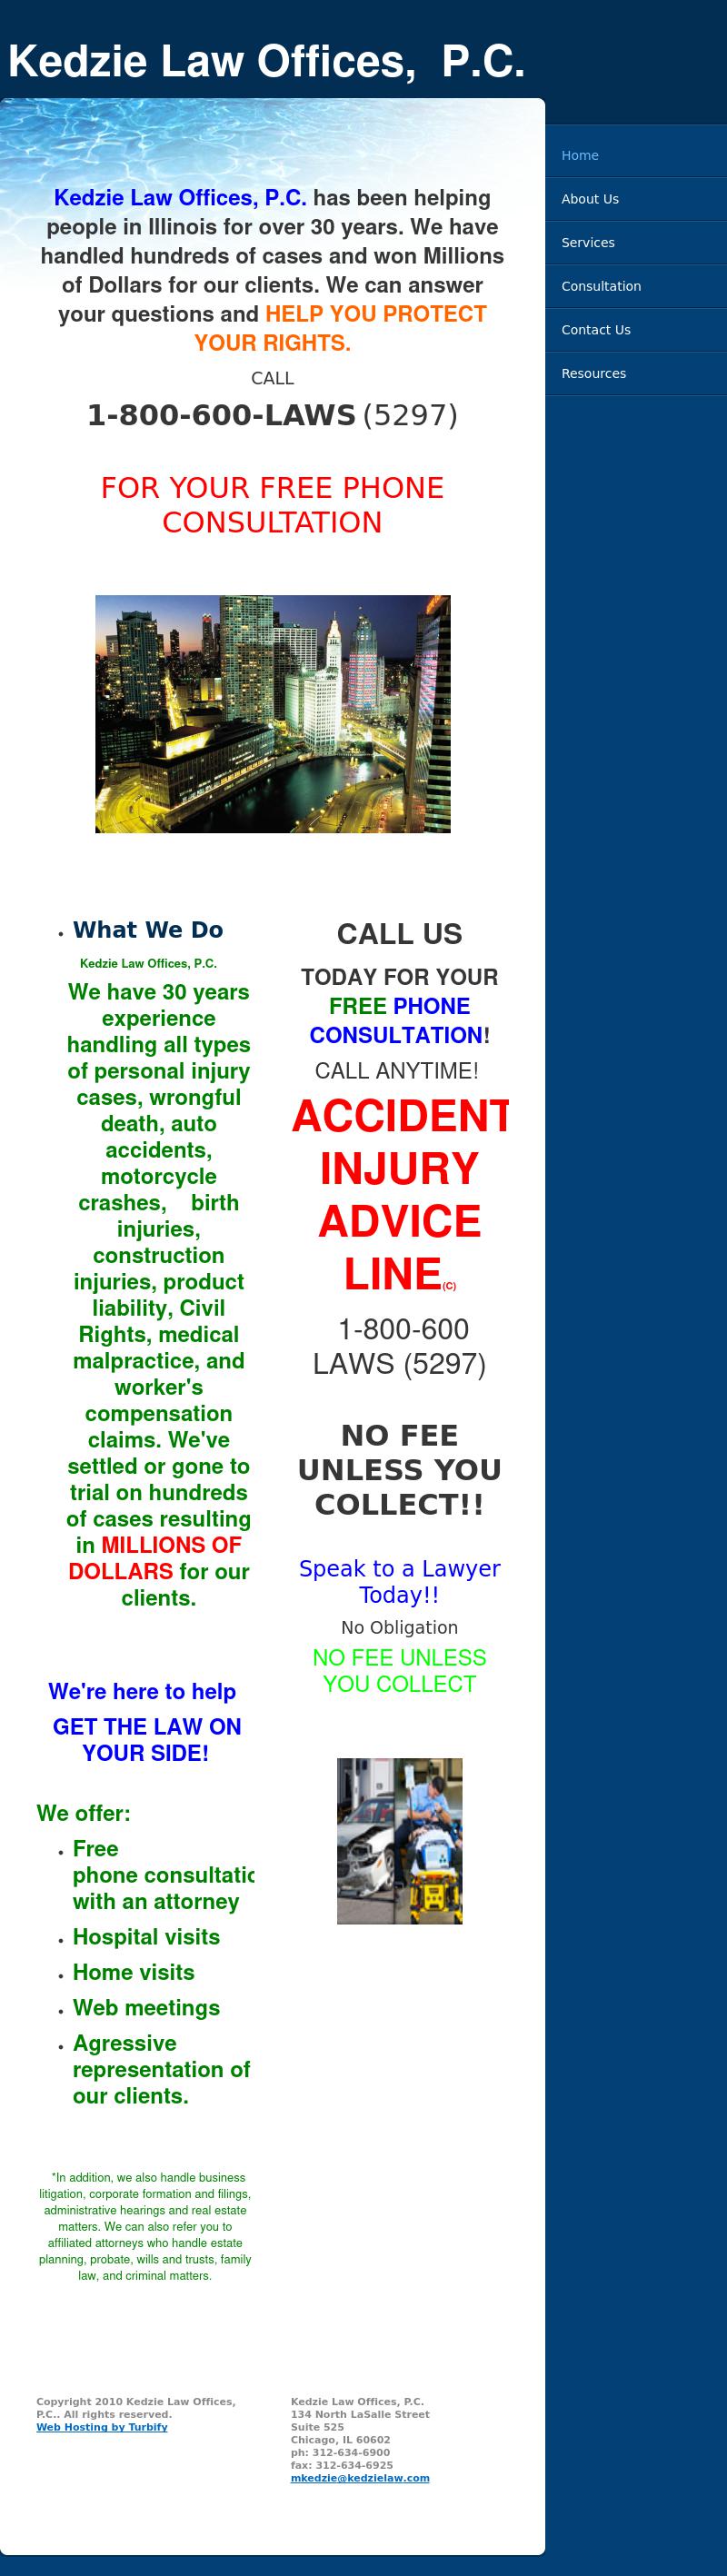 Accident Injury Advice Line - Chicago IL Lawyers